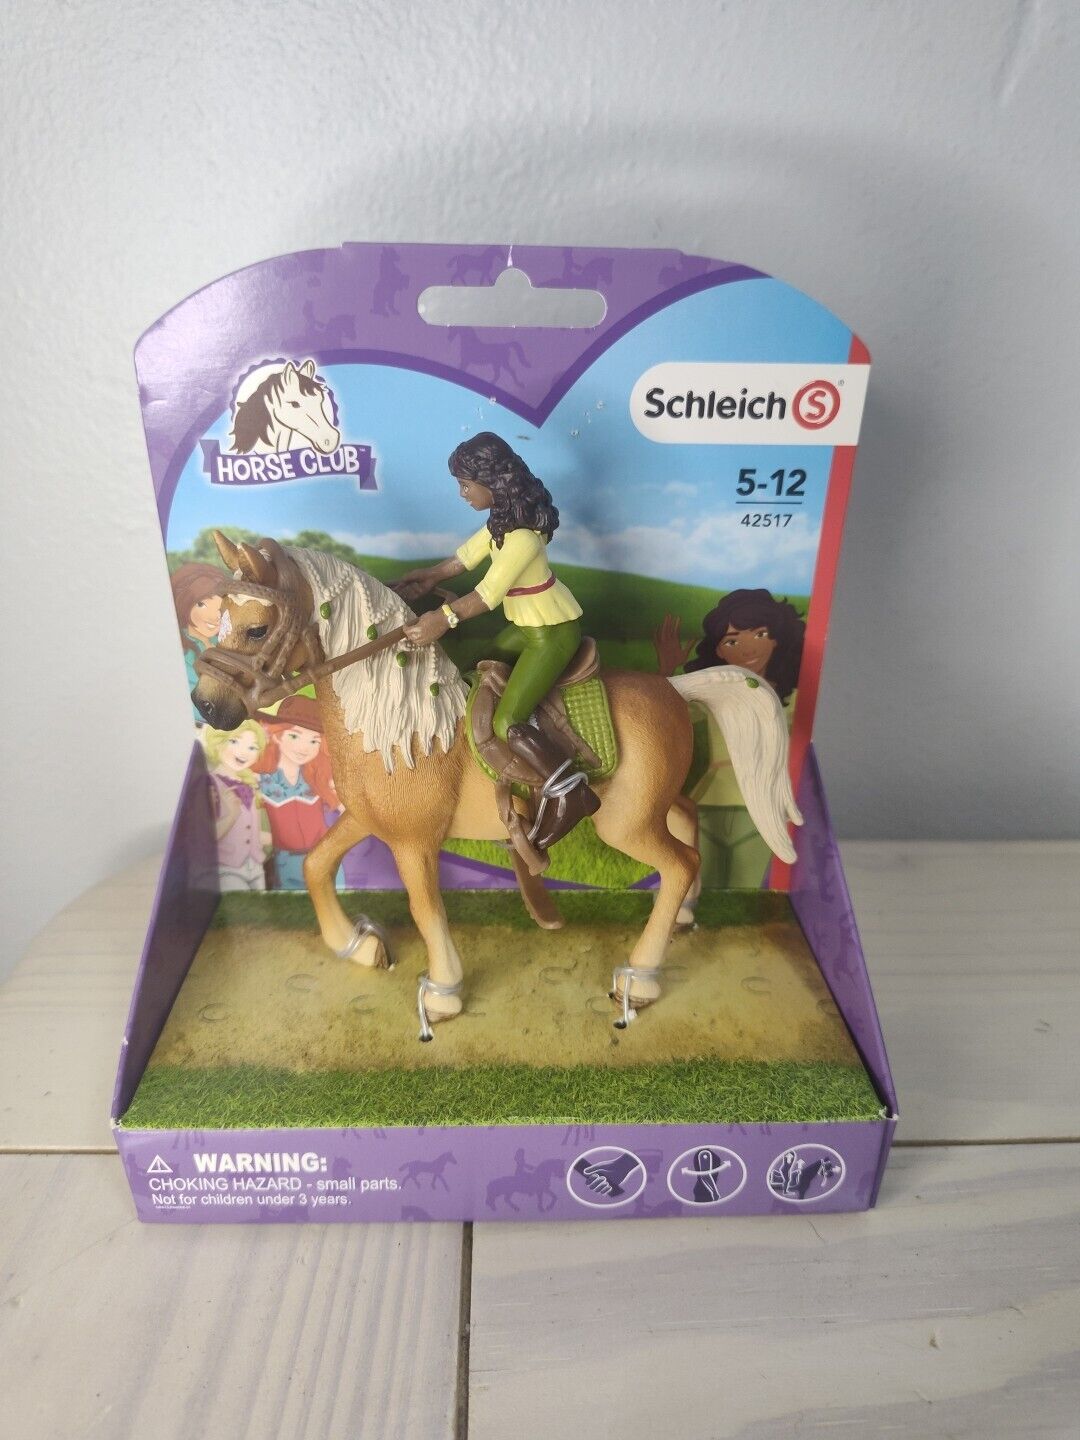 Schleich Horse Club SARAH and MYSTERY Playset #42517 BRAND NEW in BOX, Rare